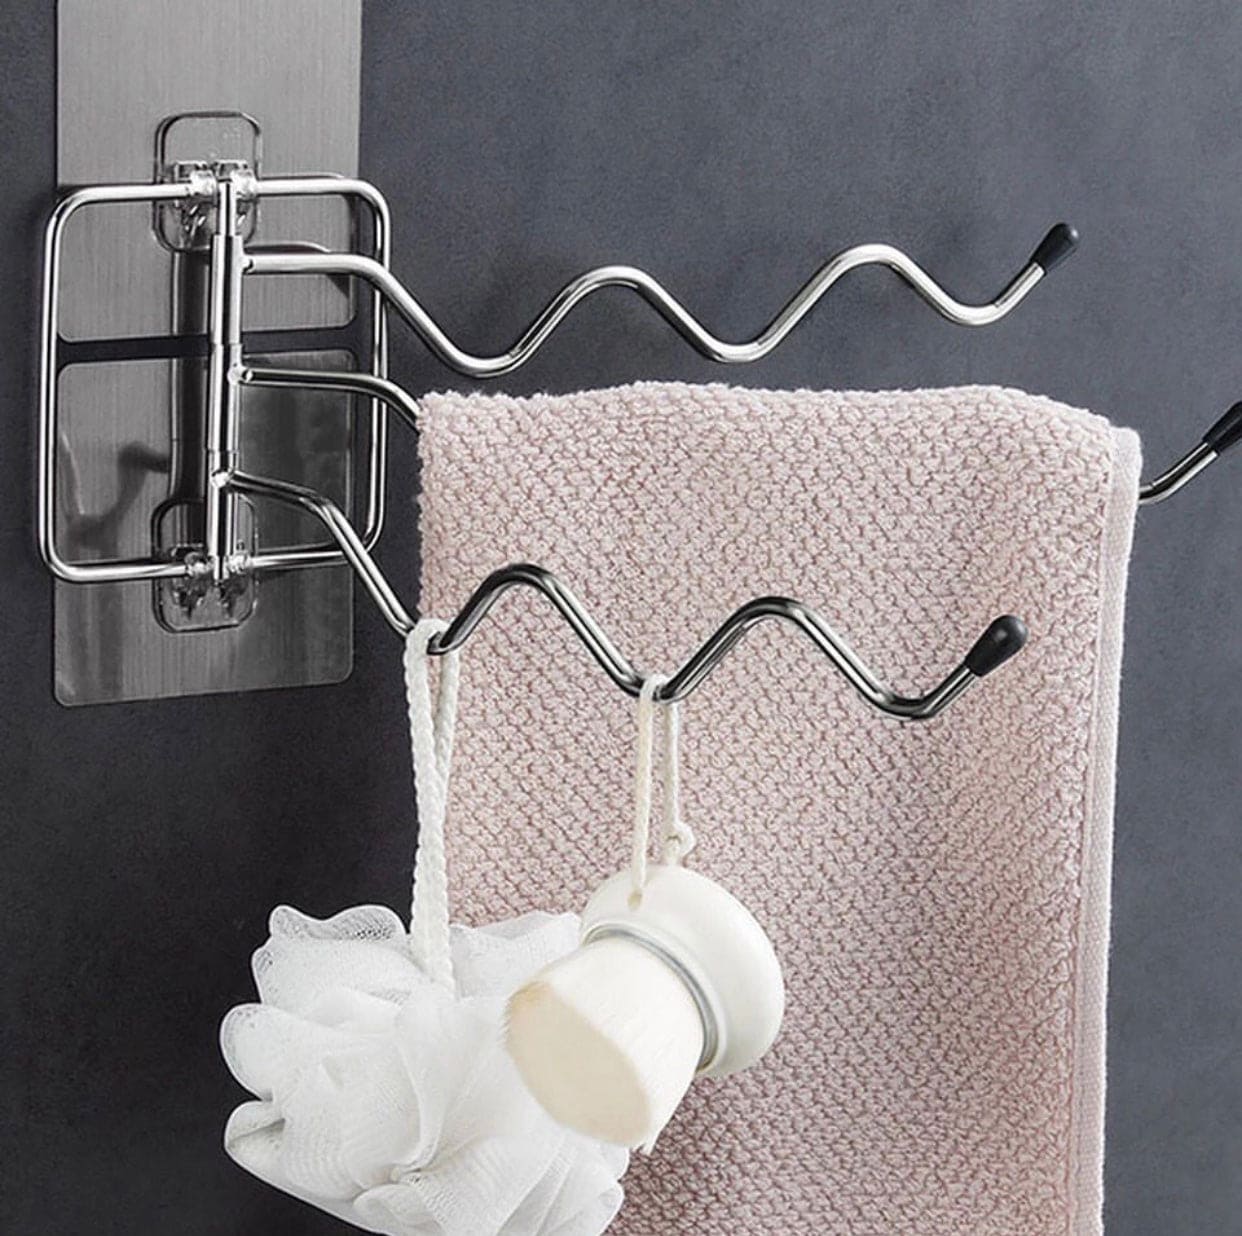 Stainless Steel Convenient Towel Rail Wall-Mounted Compact Bathroom Holder, Arm Bathroom Swing Towel Hanger, Premium Bathroom Holder, Wave Towel Holder